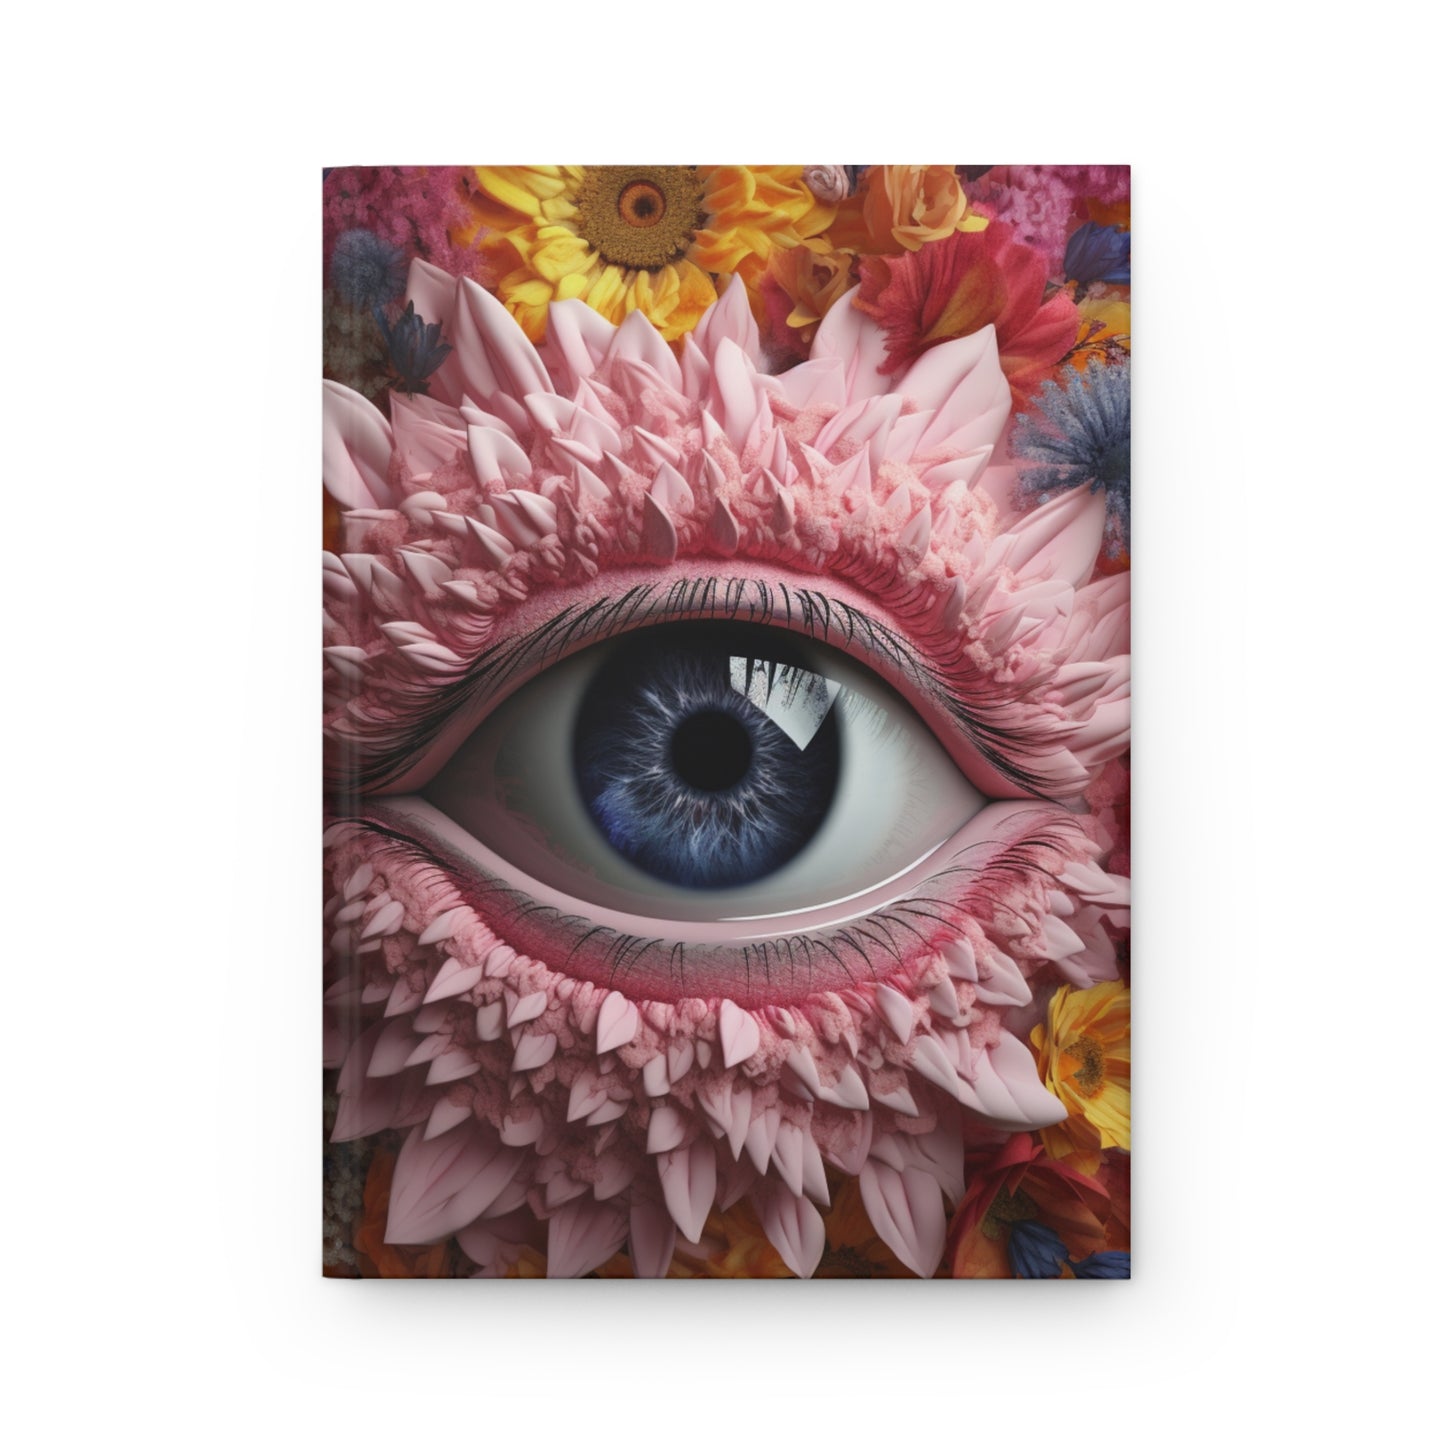 Floral Eye Hardcover Notebook, Pink Flower Design Journal, Wellness Self Care Diary, Lined Writing Planner, Unique 5.75"x7.5" Gift Journal